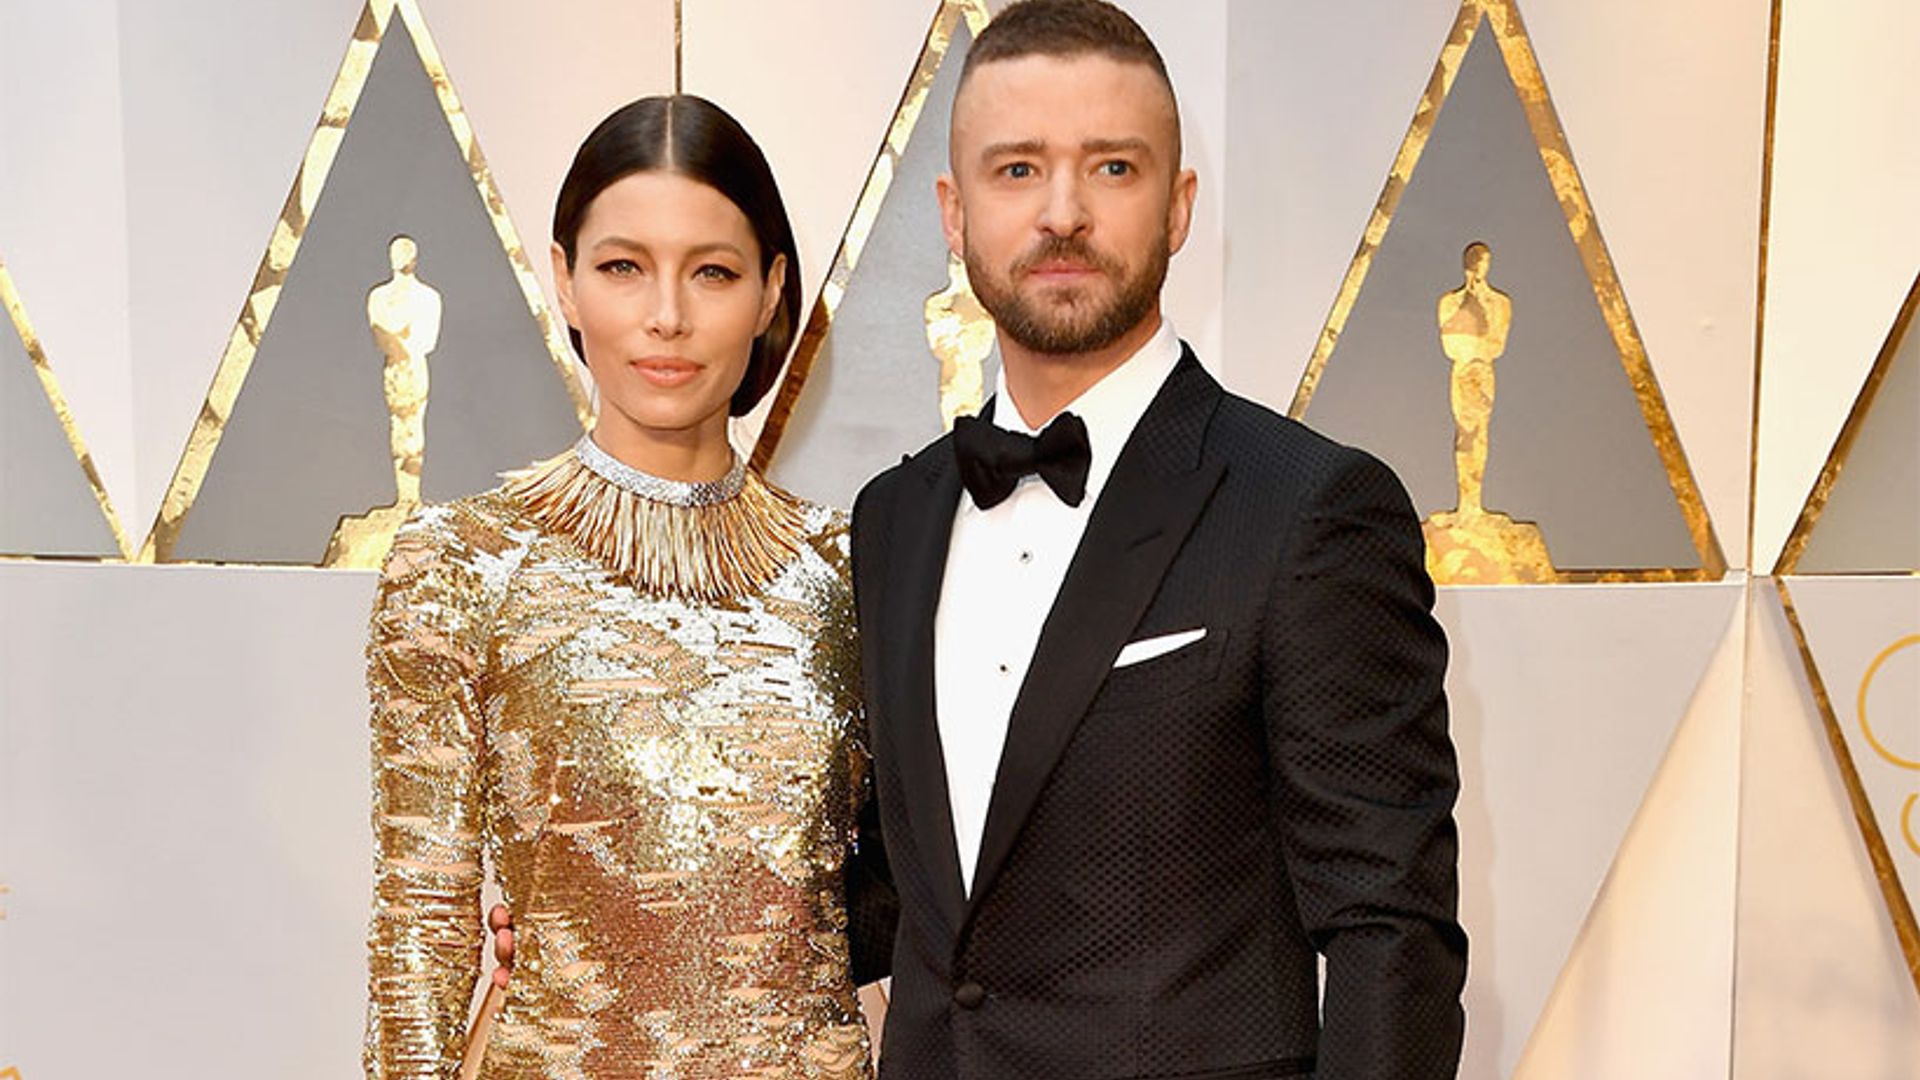 Justin Timberlake photobombed wife Jessica Biel on the Oscars red carpet - see the hilarious photo here...